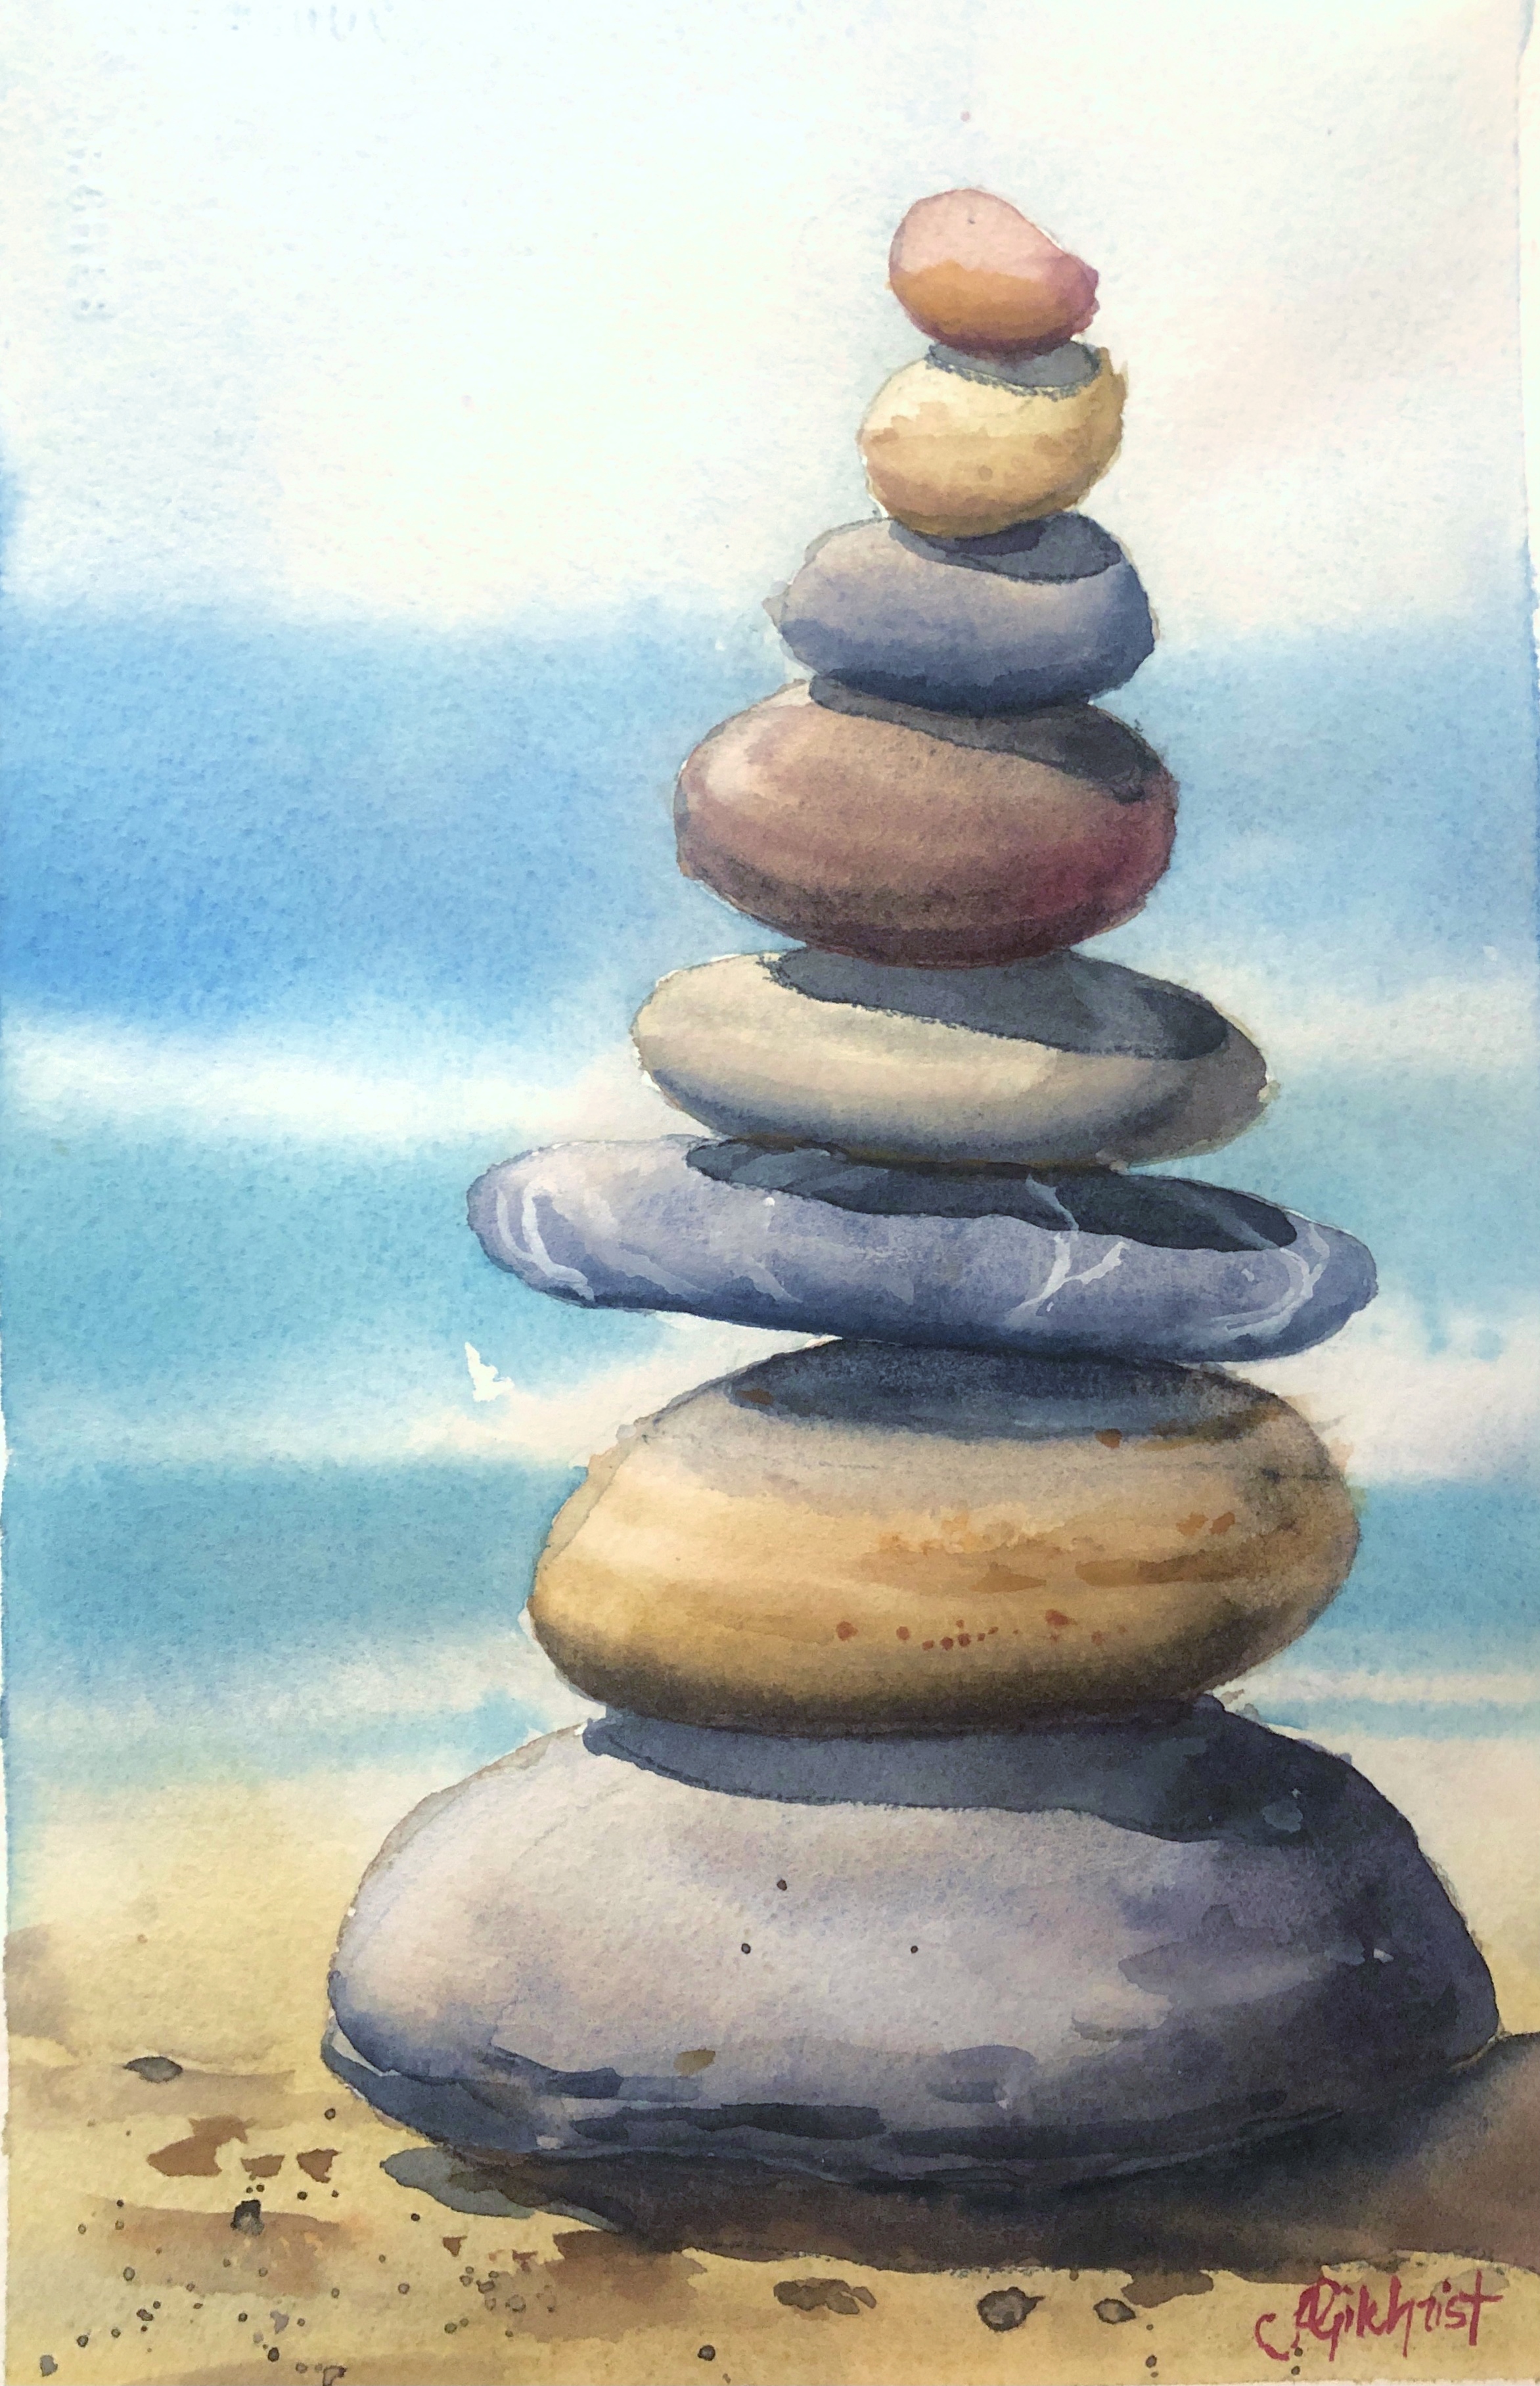 Watercolour workshops online on demand with Jenny Giclhrist and Northern Beaches Watercolour